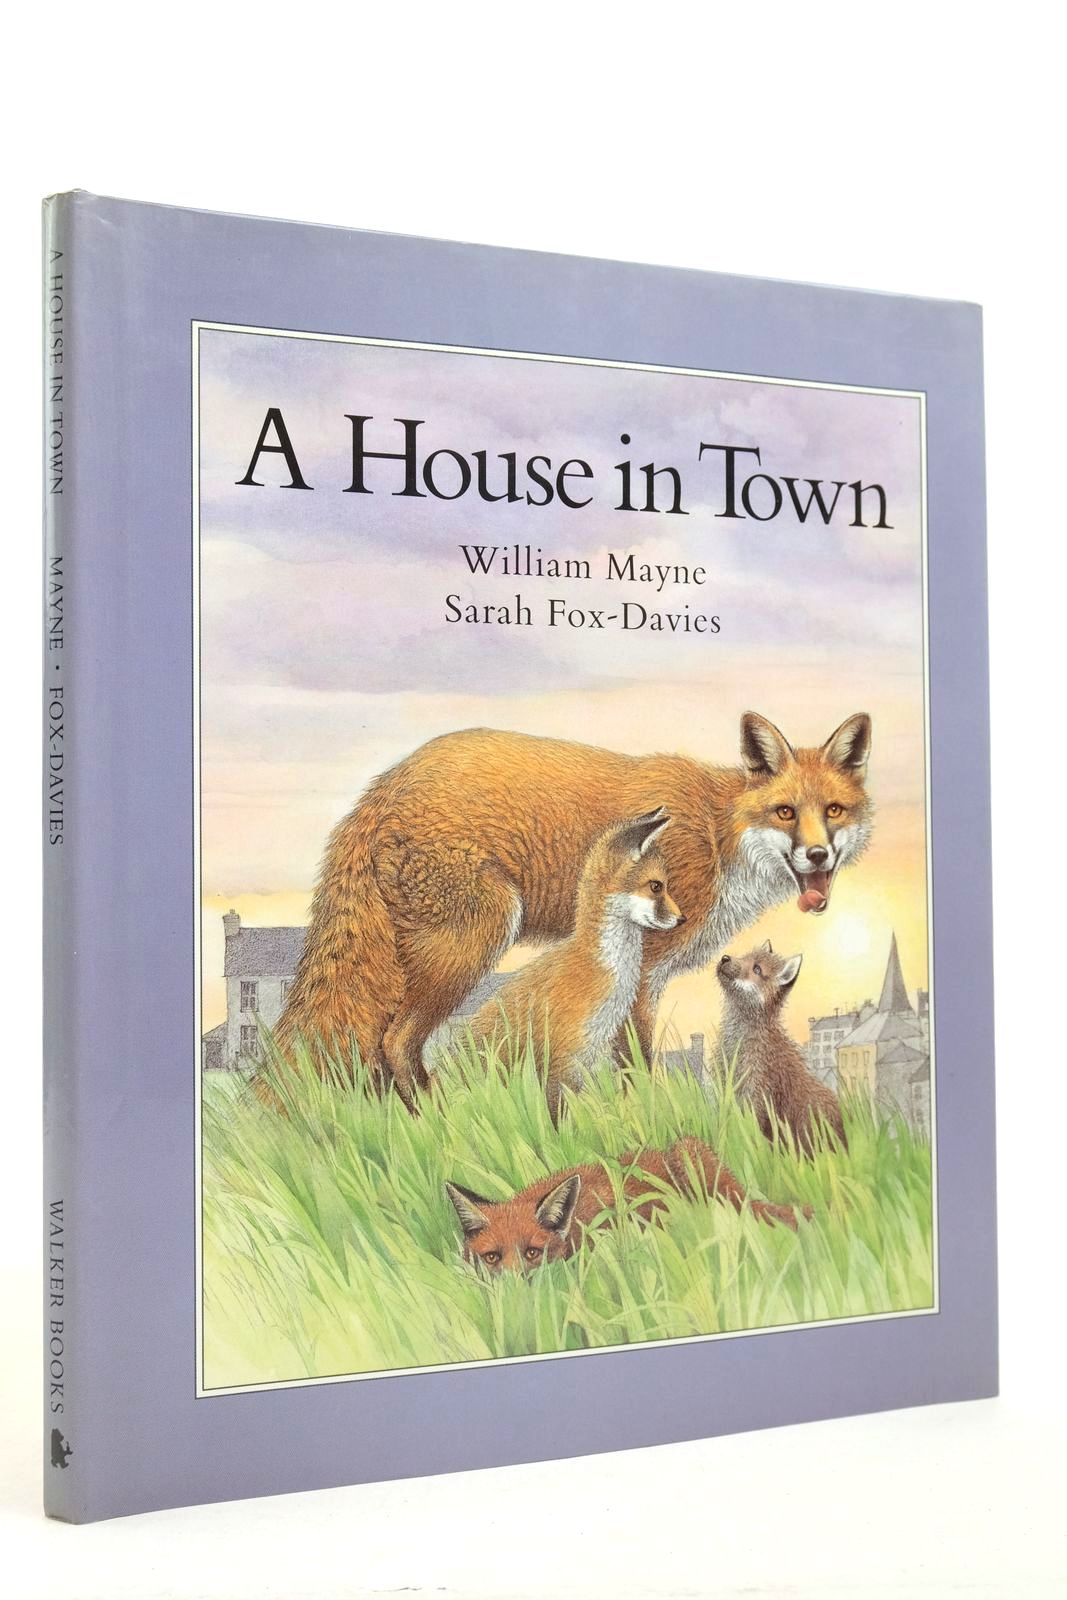 Photo of A HOUSE IN TOWN written by Mayne, William illustrated by Fox-Davies, Sarah published by Walker Books Ltd (STOCK CODE: 2140272)  for sale by Stella & Rose's Books